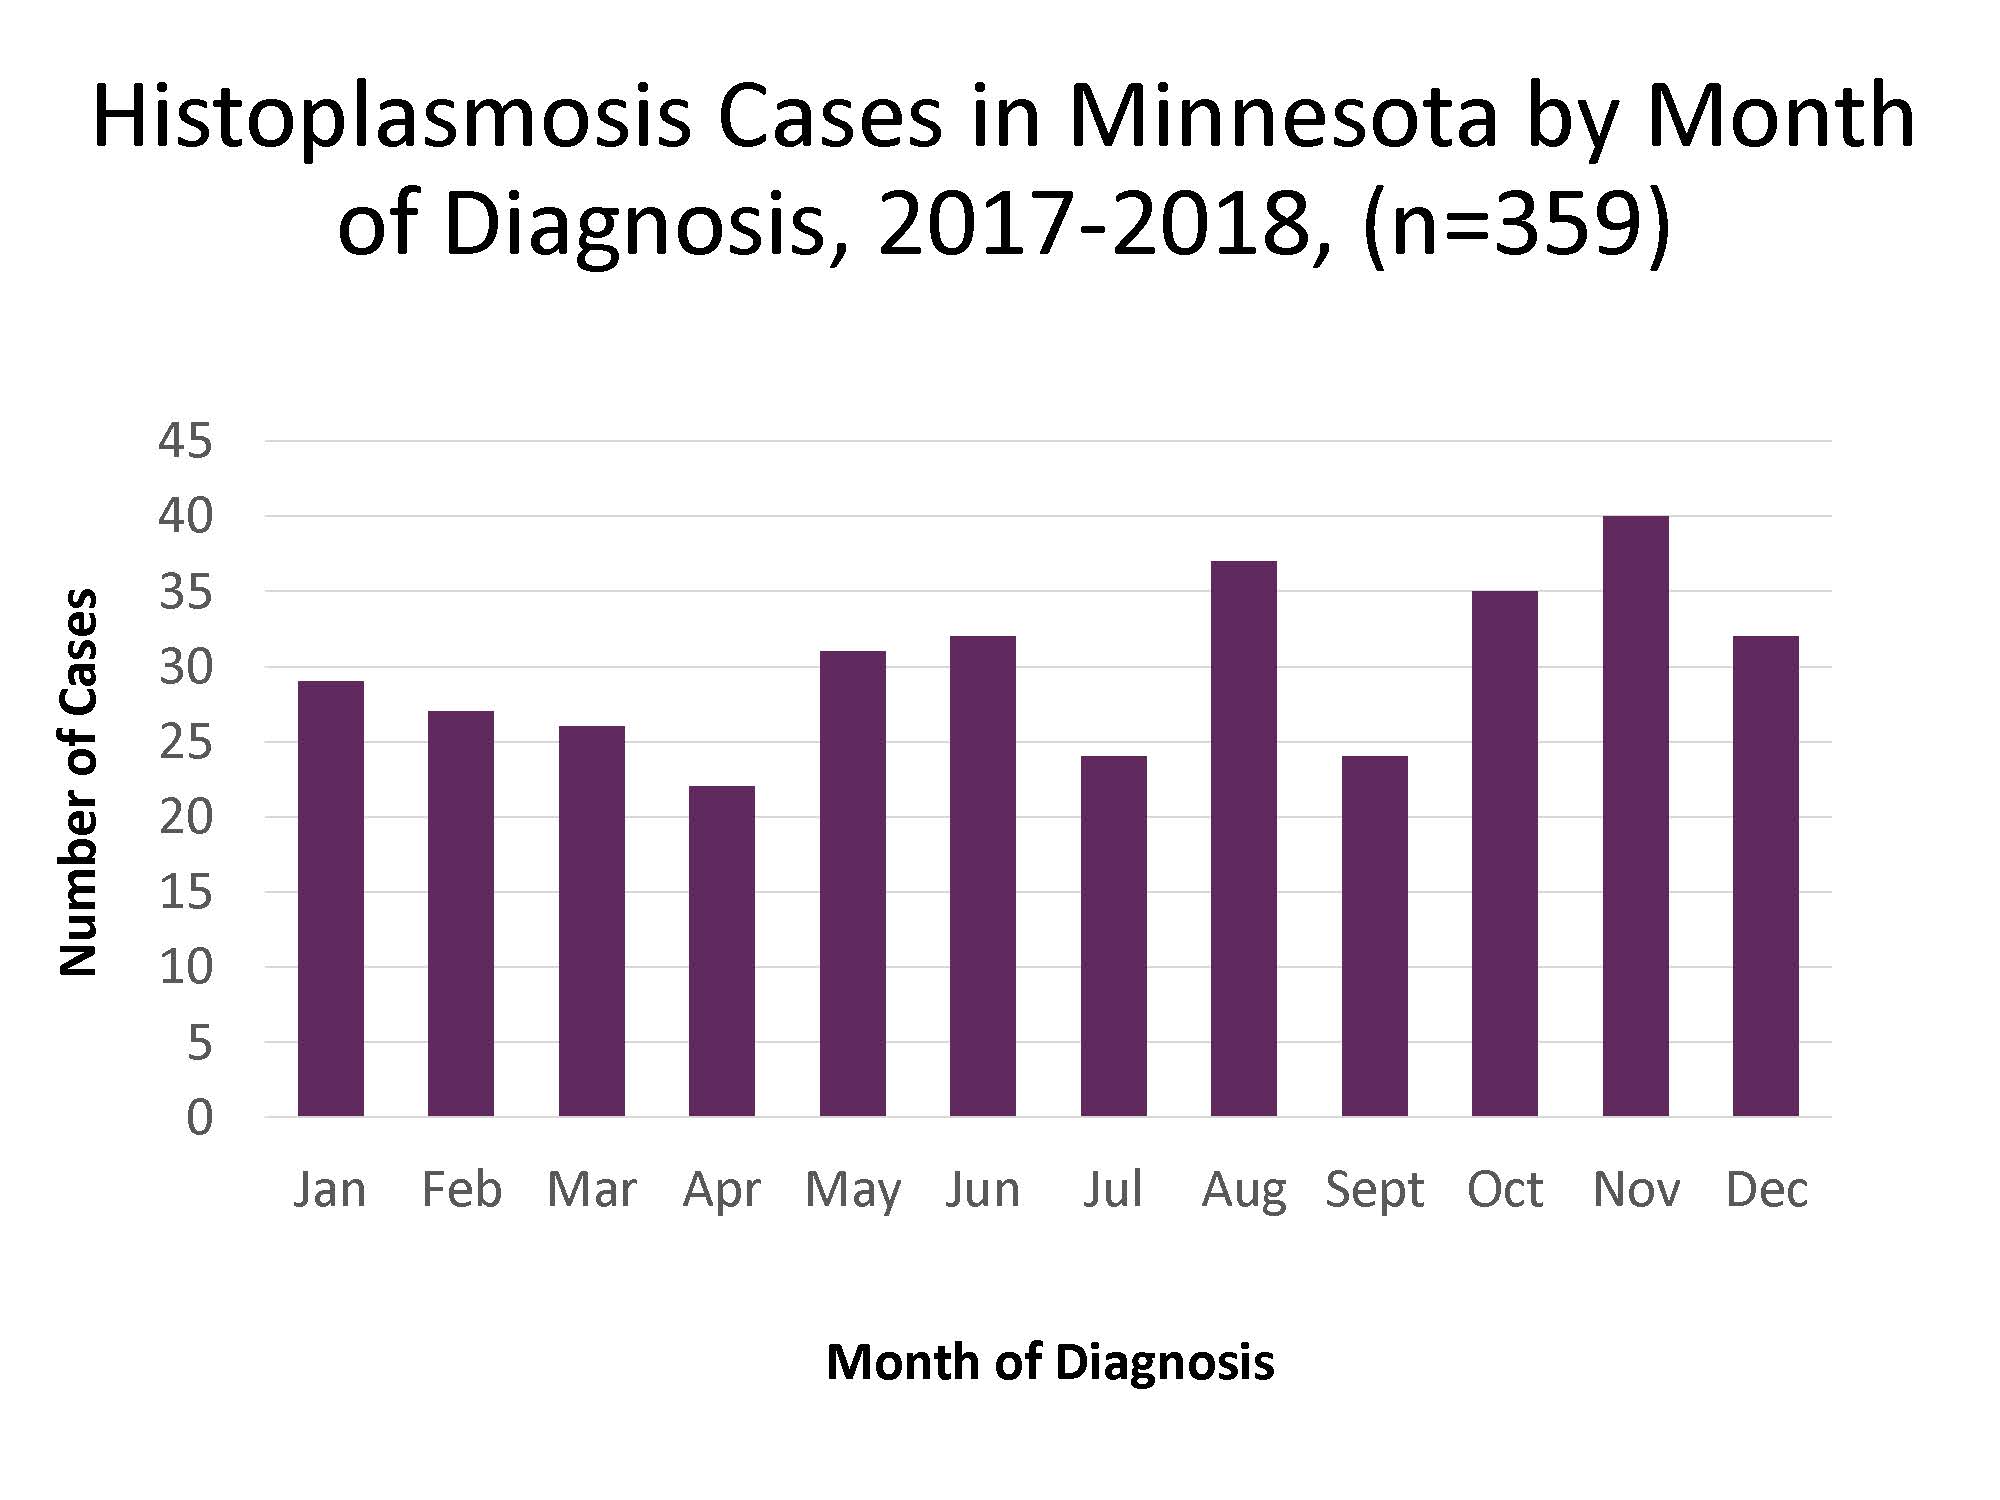 Thumbnail of graph showing histoplasmosis cases by month of diagnosis in Minnesota, 2017-2018